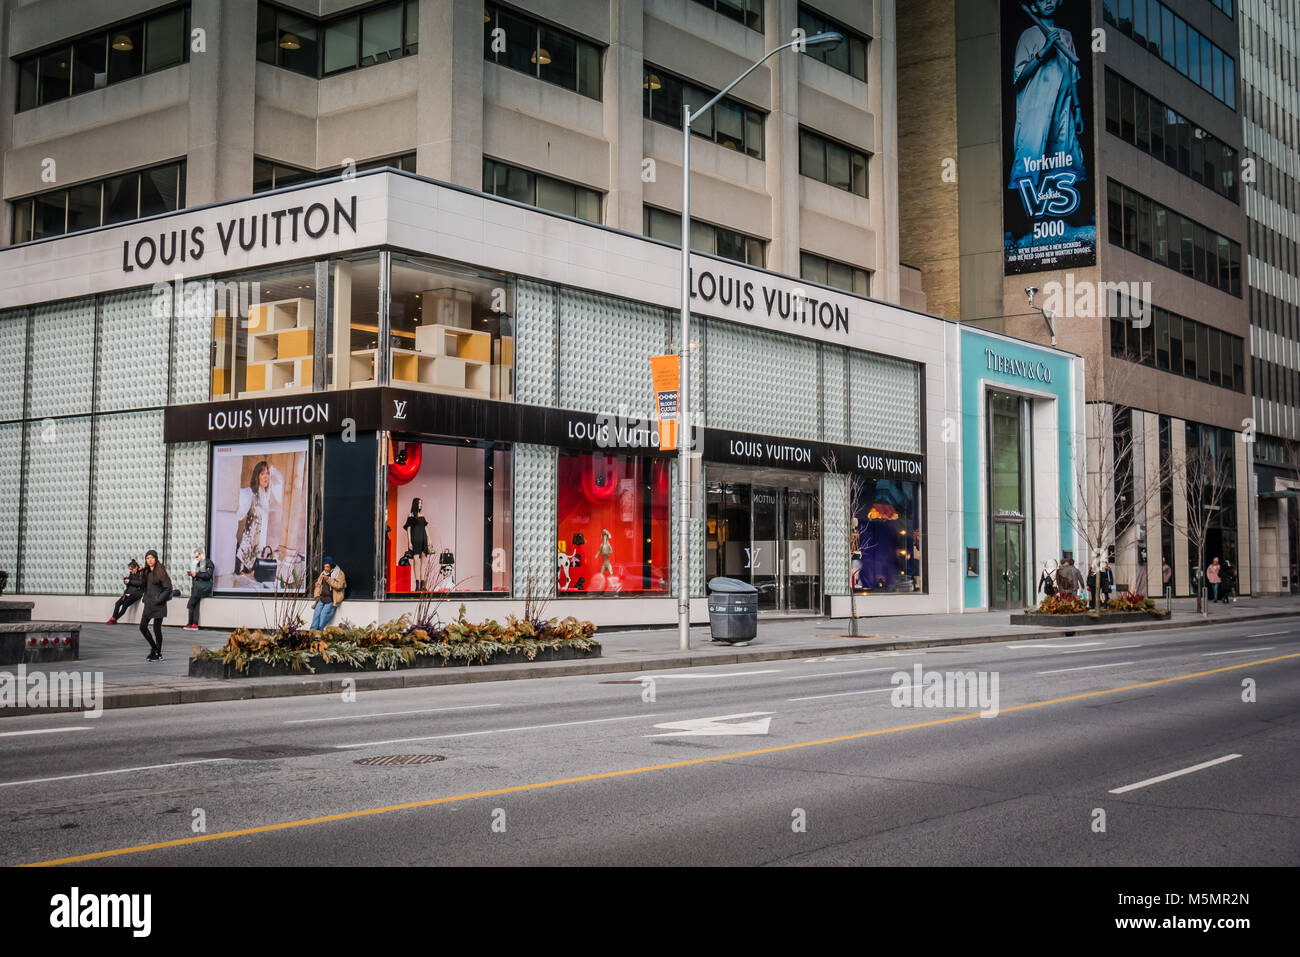 How to get to Louis Vuitton Toronto Bloor Street by Subway, Bus or Train?